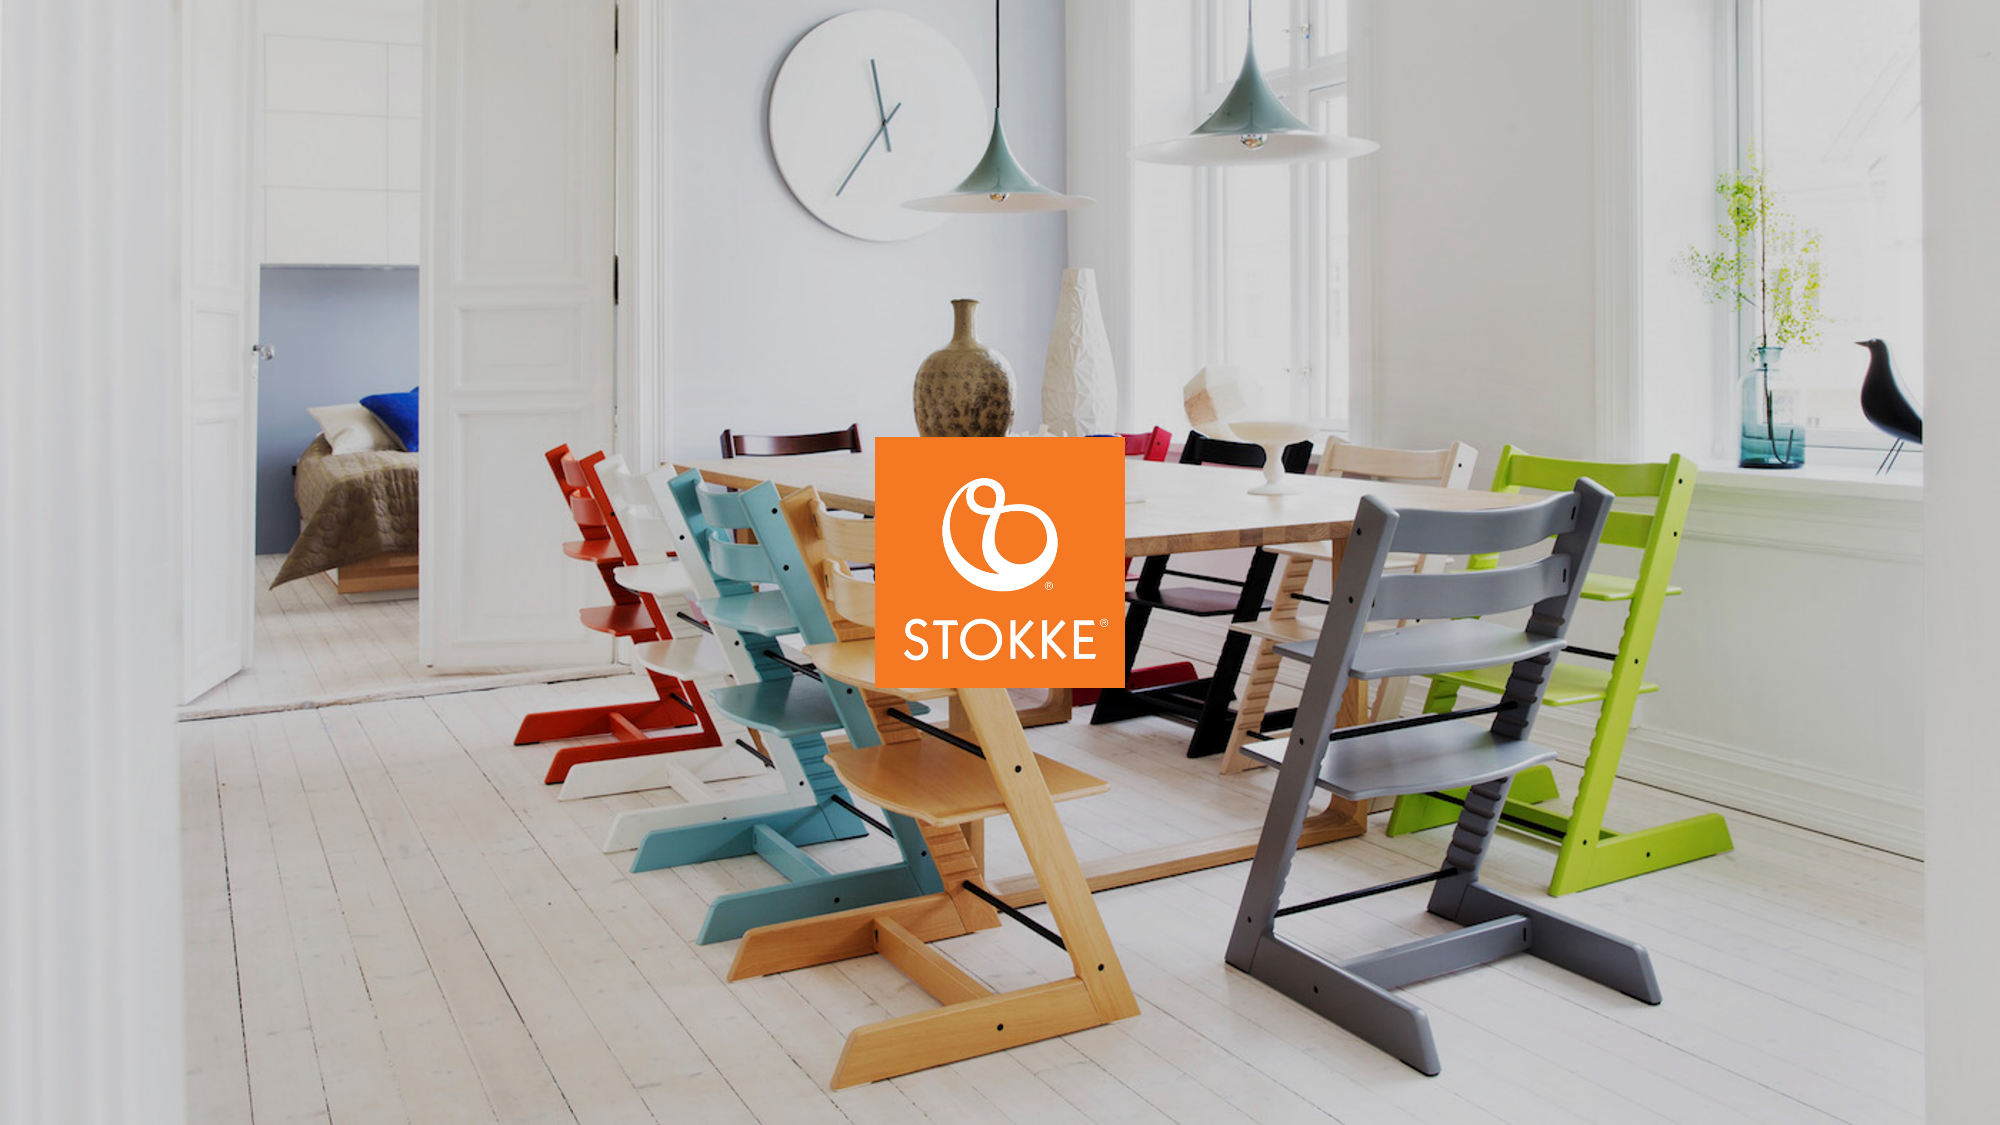 Stokke-Customer-experience-marketing-business-and-digital-transformation-change-management